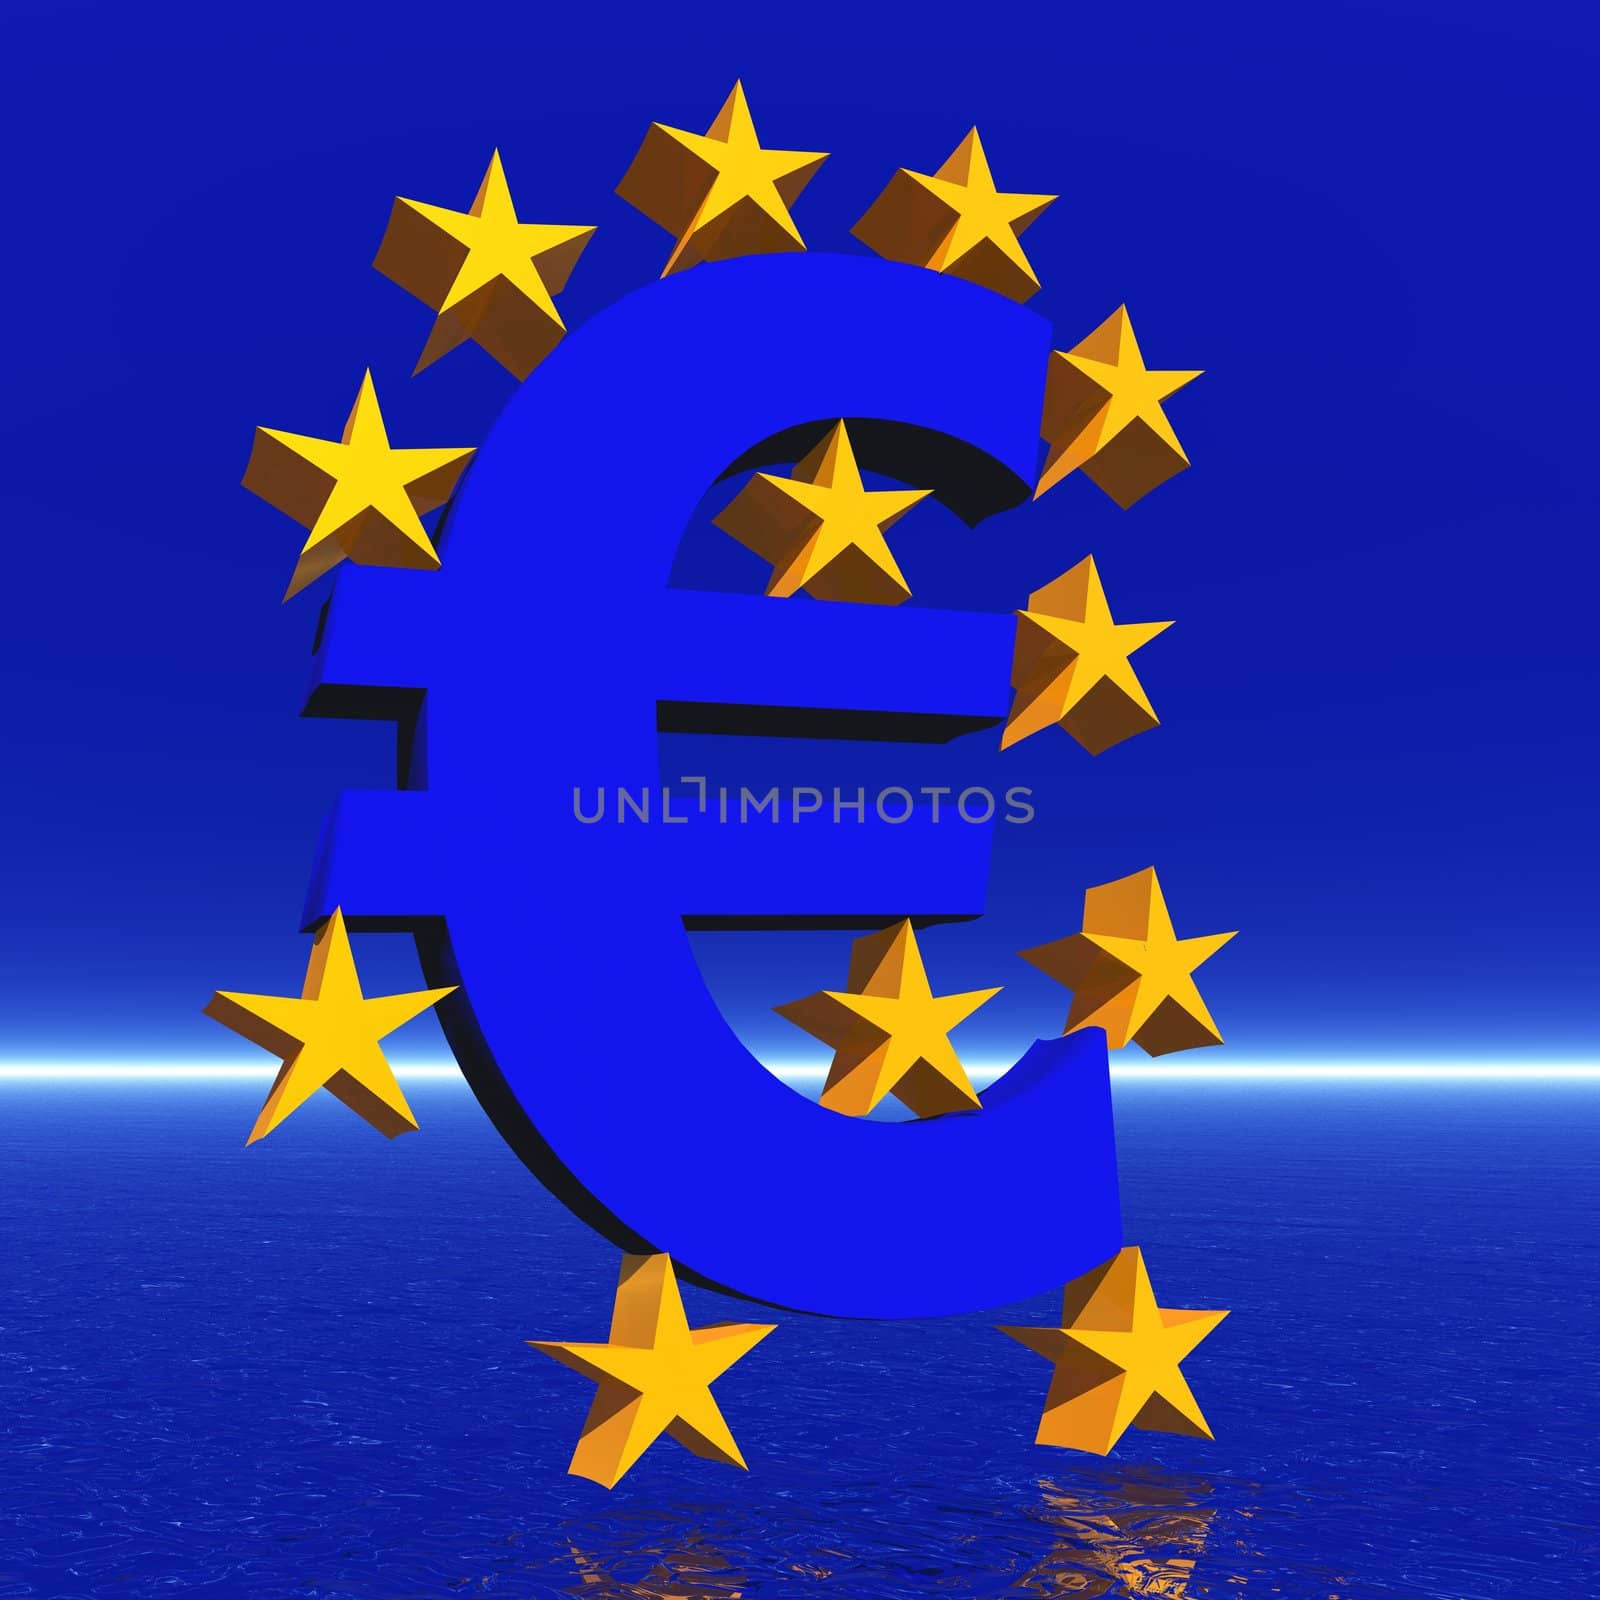 Euro sign and twelves yellow stars in blue background